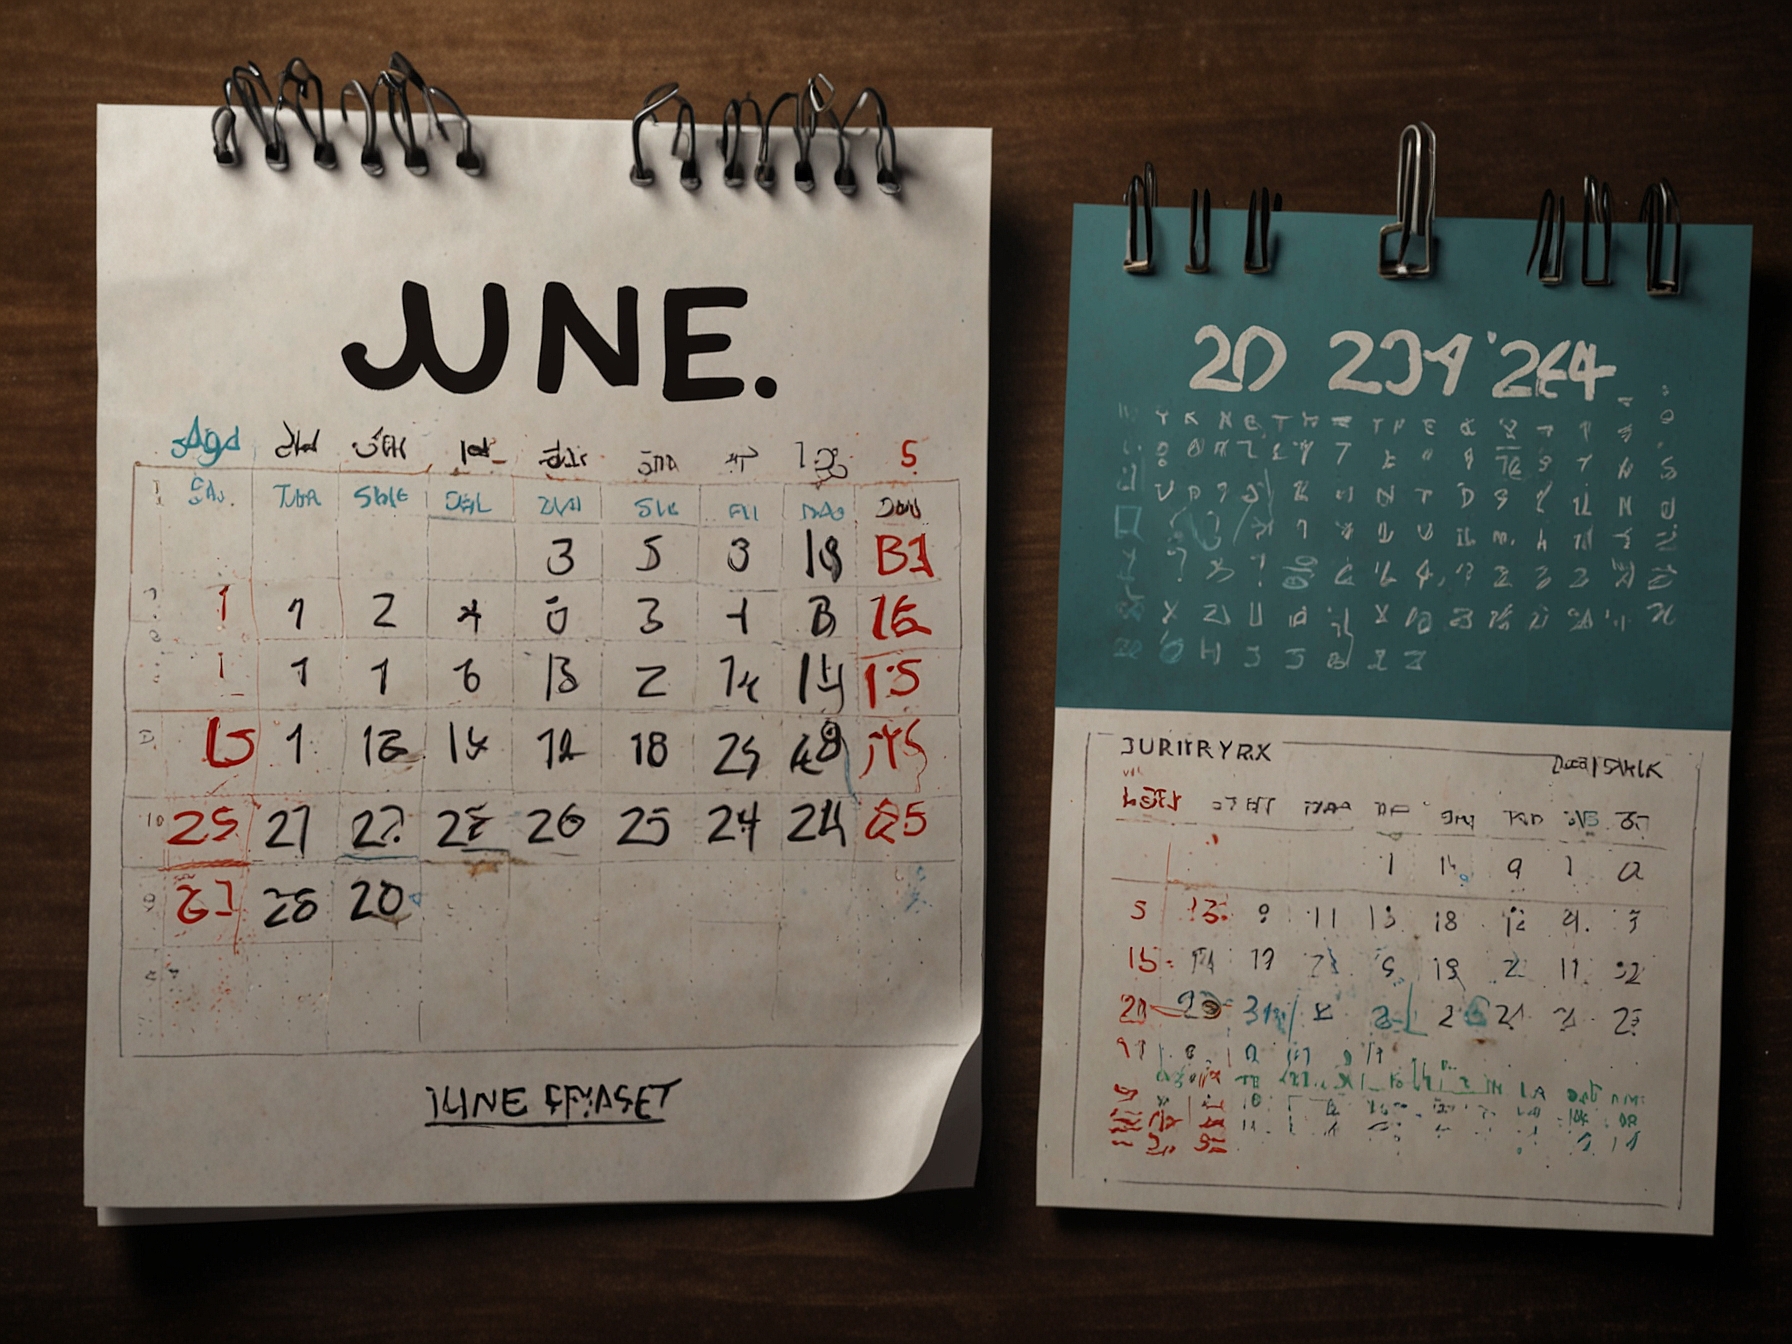 Illustration showing a calendar marked with the date June 17, 2024, indicating the closure of NSE and BSE due to Eid al-Adha. This visual emphasizes planning around market holidays.